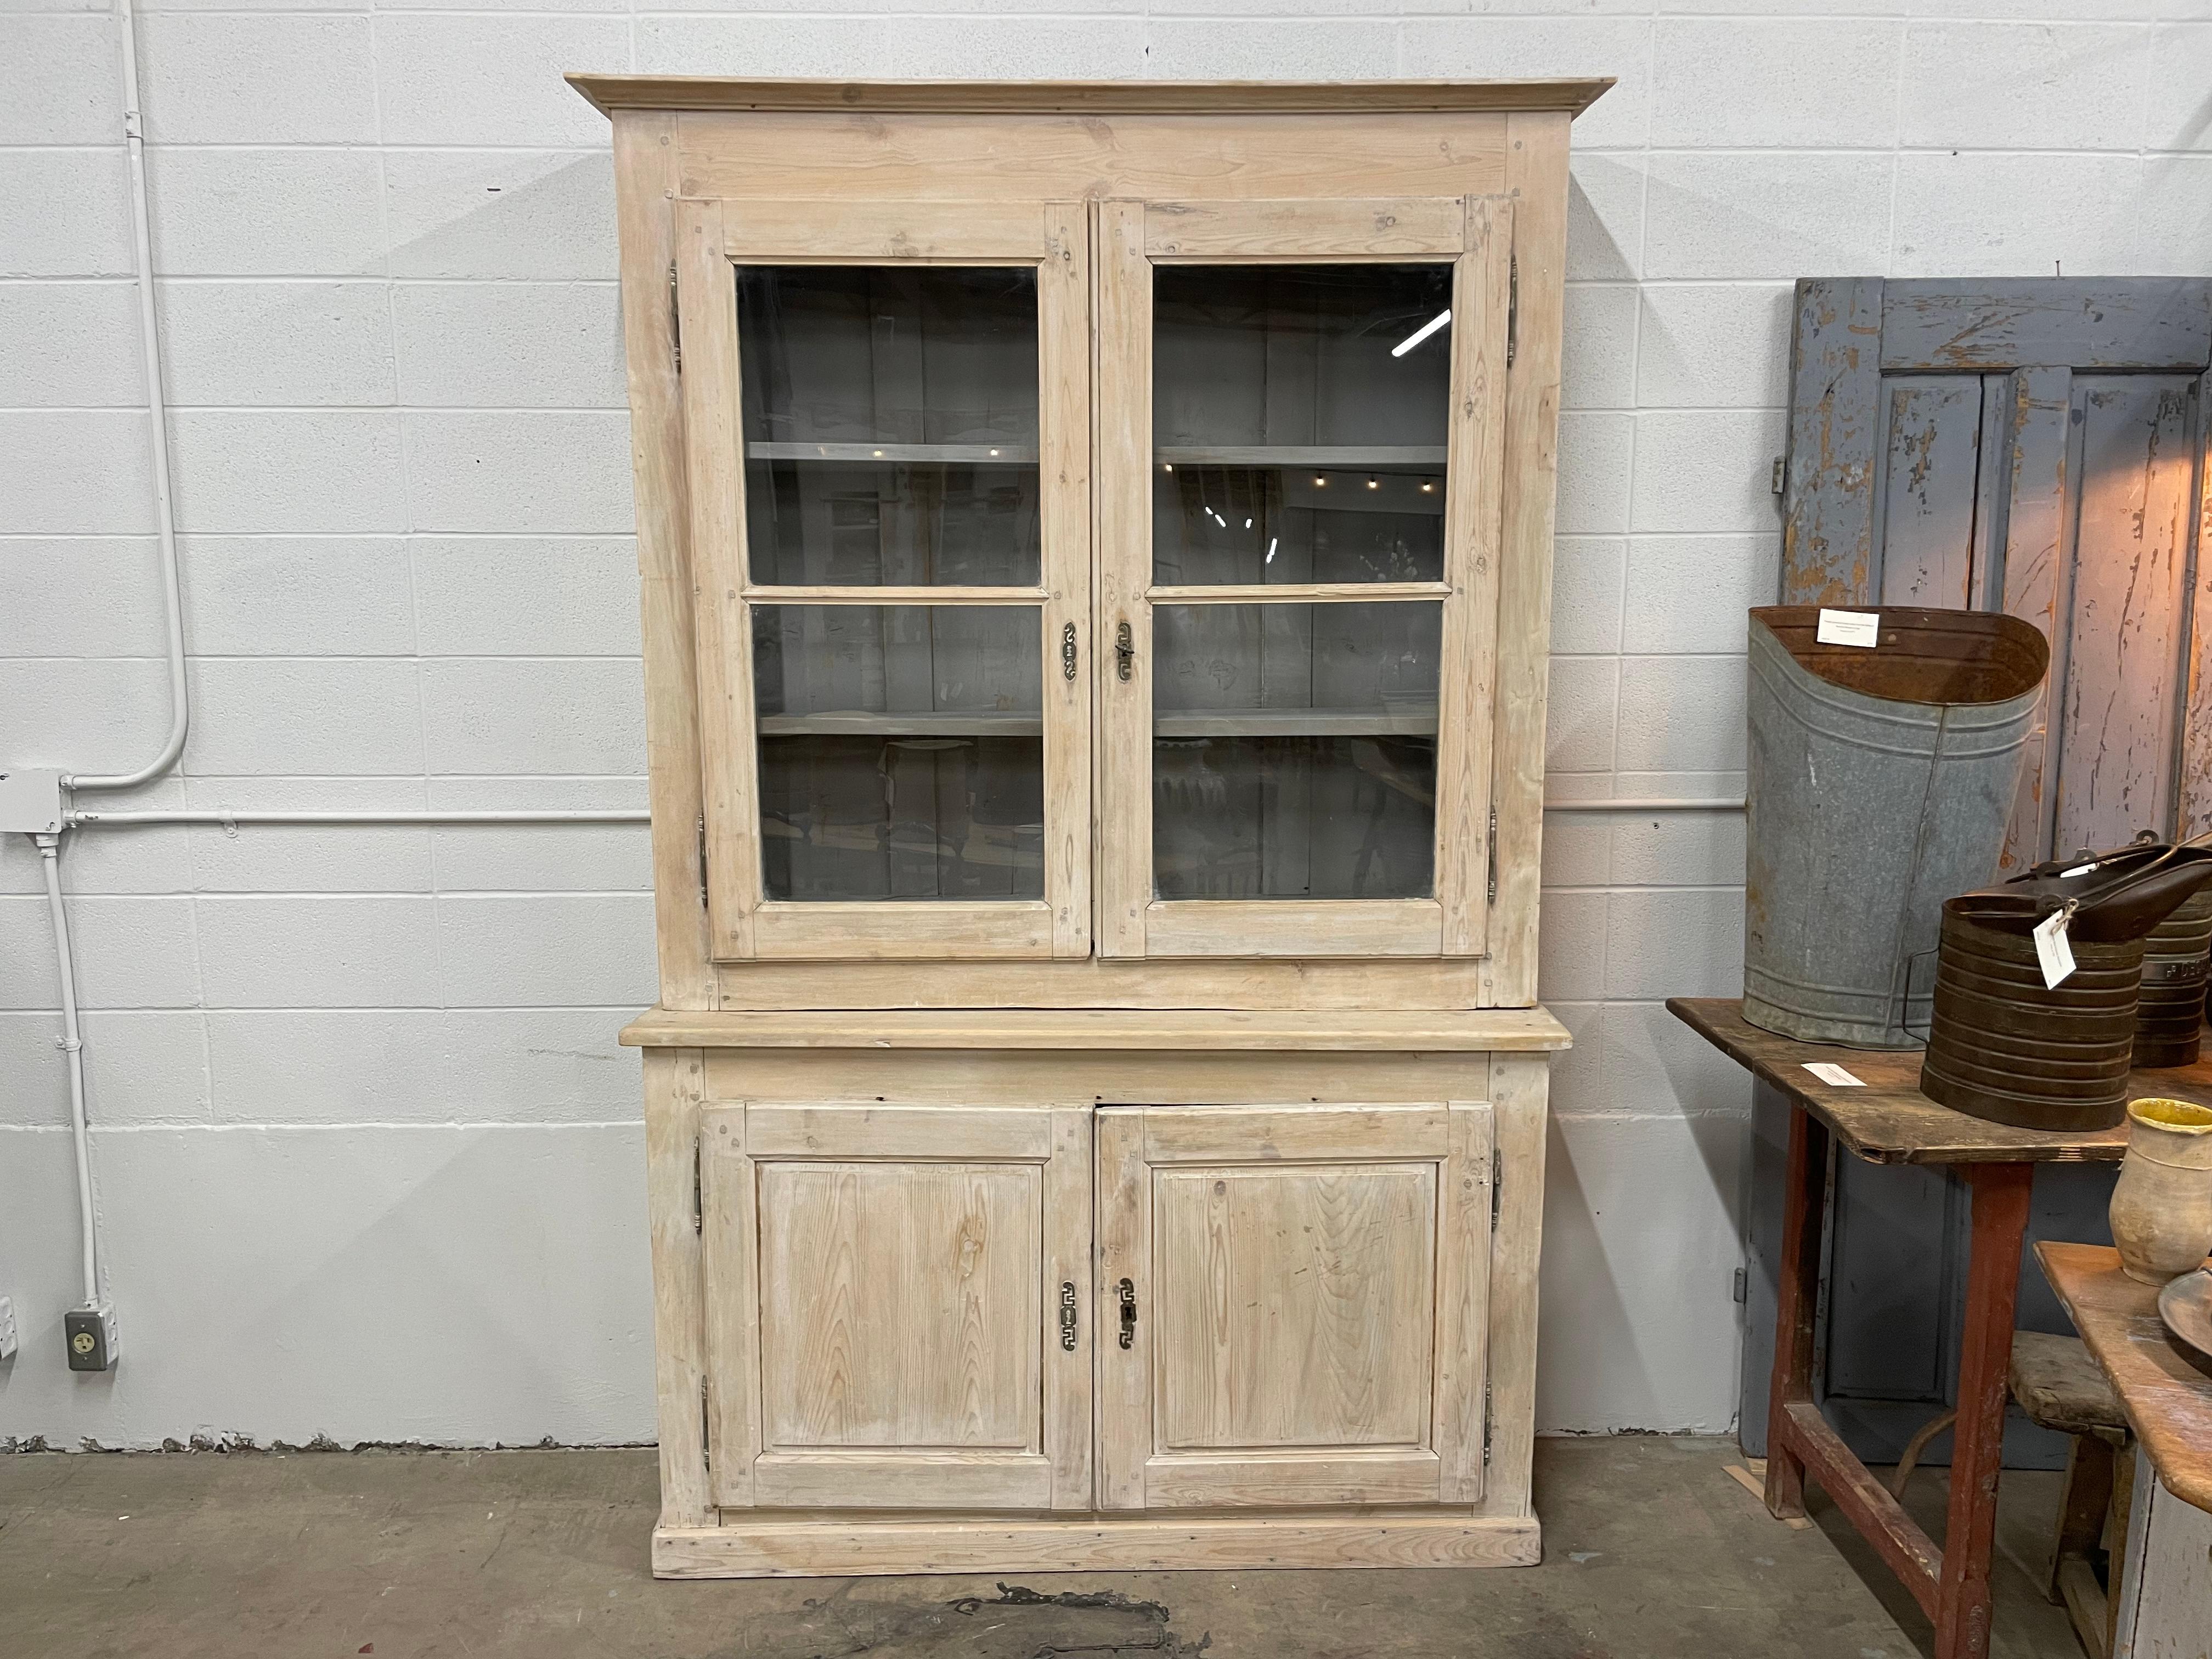 Antique French  limed pine buffet a de corps, with large glazed doors over 2 blind doors. It has 2 shelves above and one below. Original hinges and escutcheons sets off this understated piece with later French blue washed interior. Lovely peg